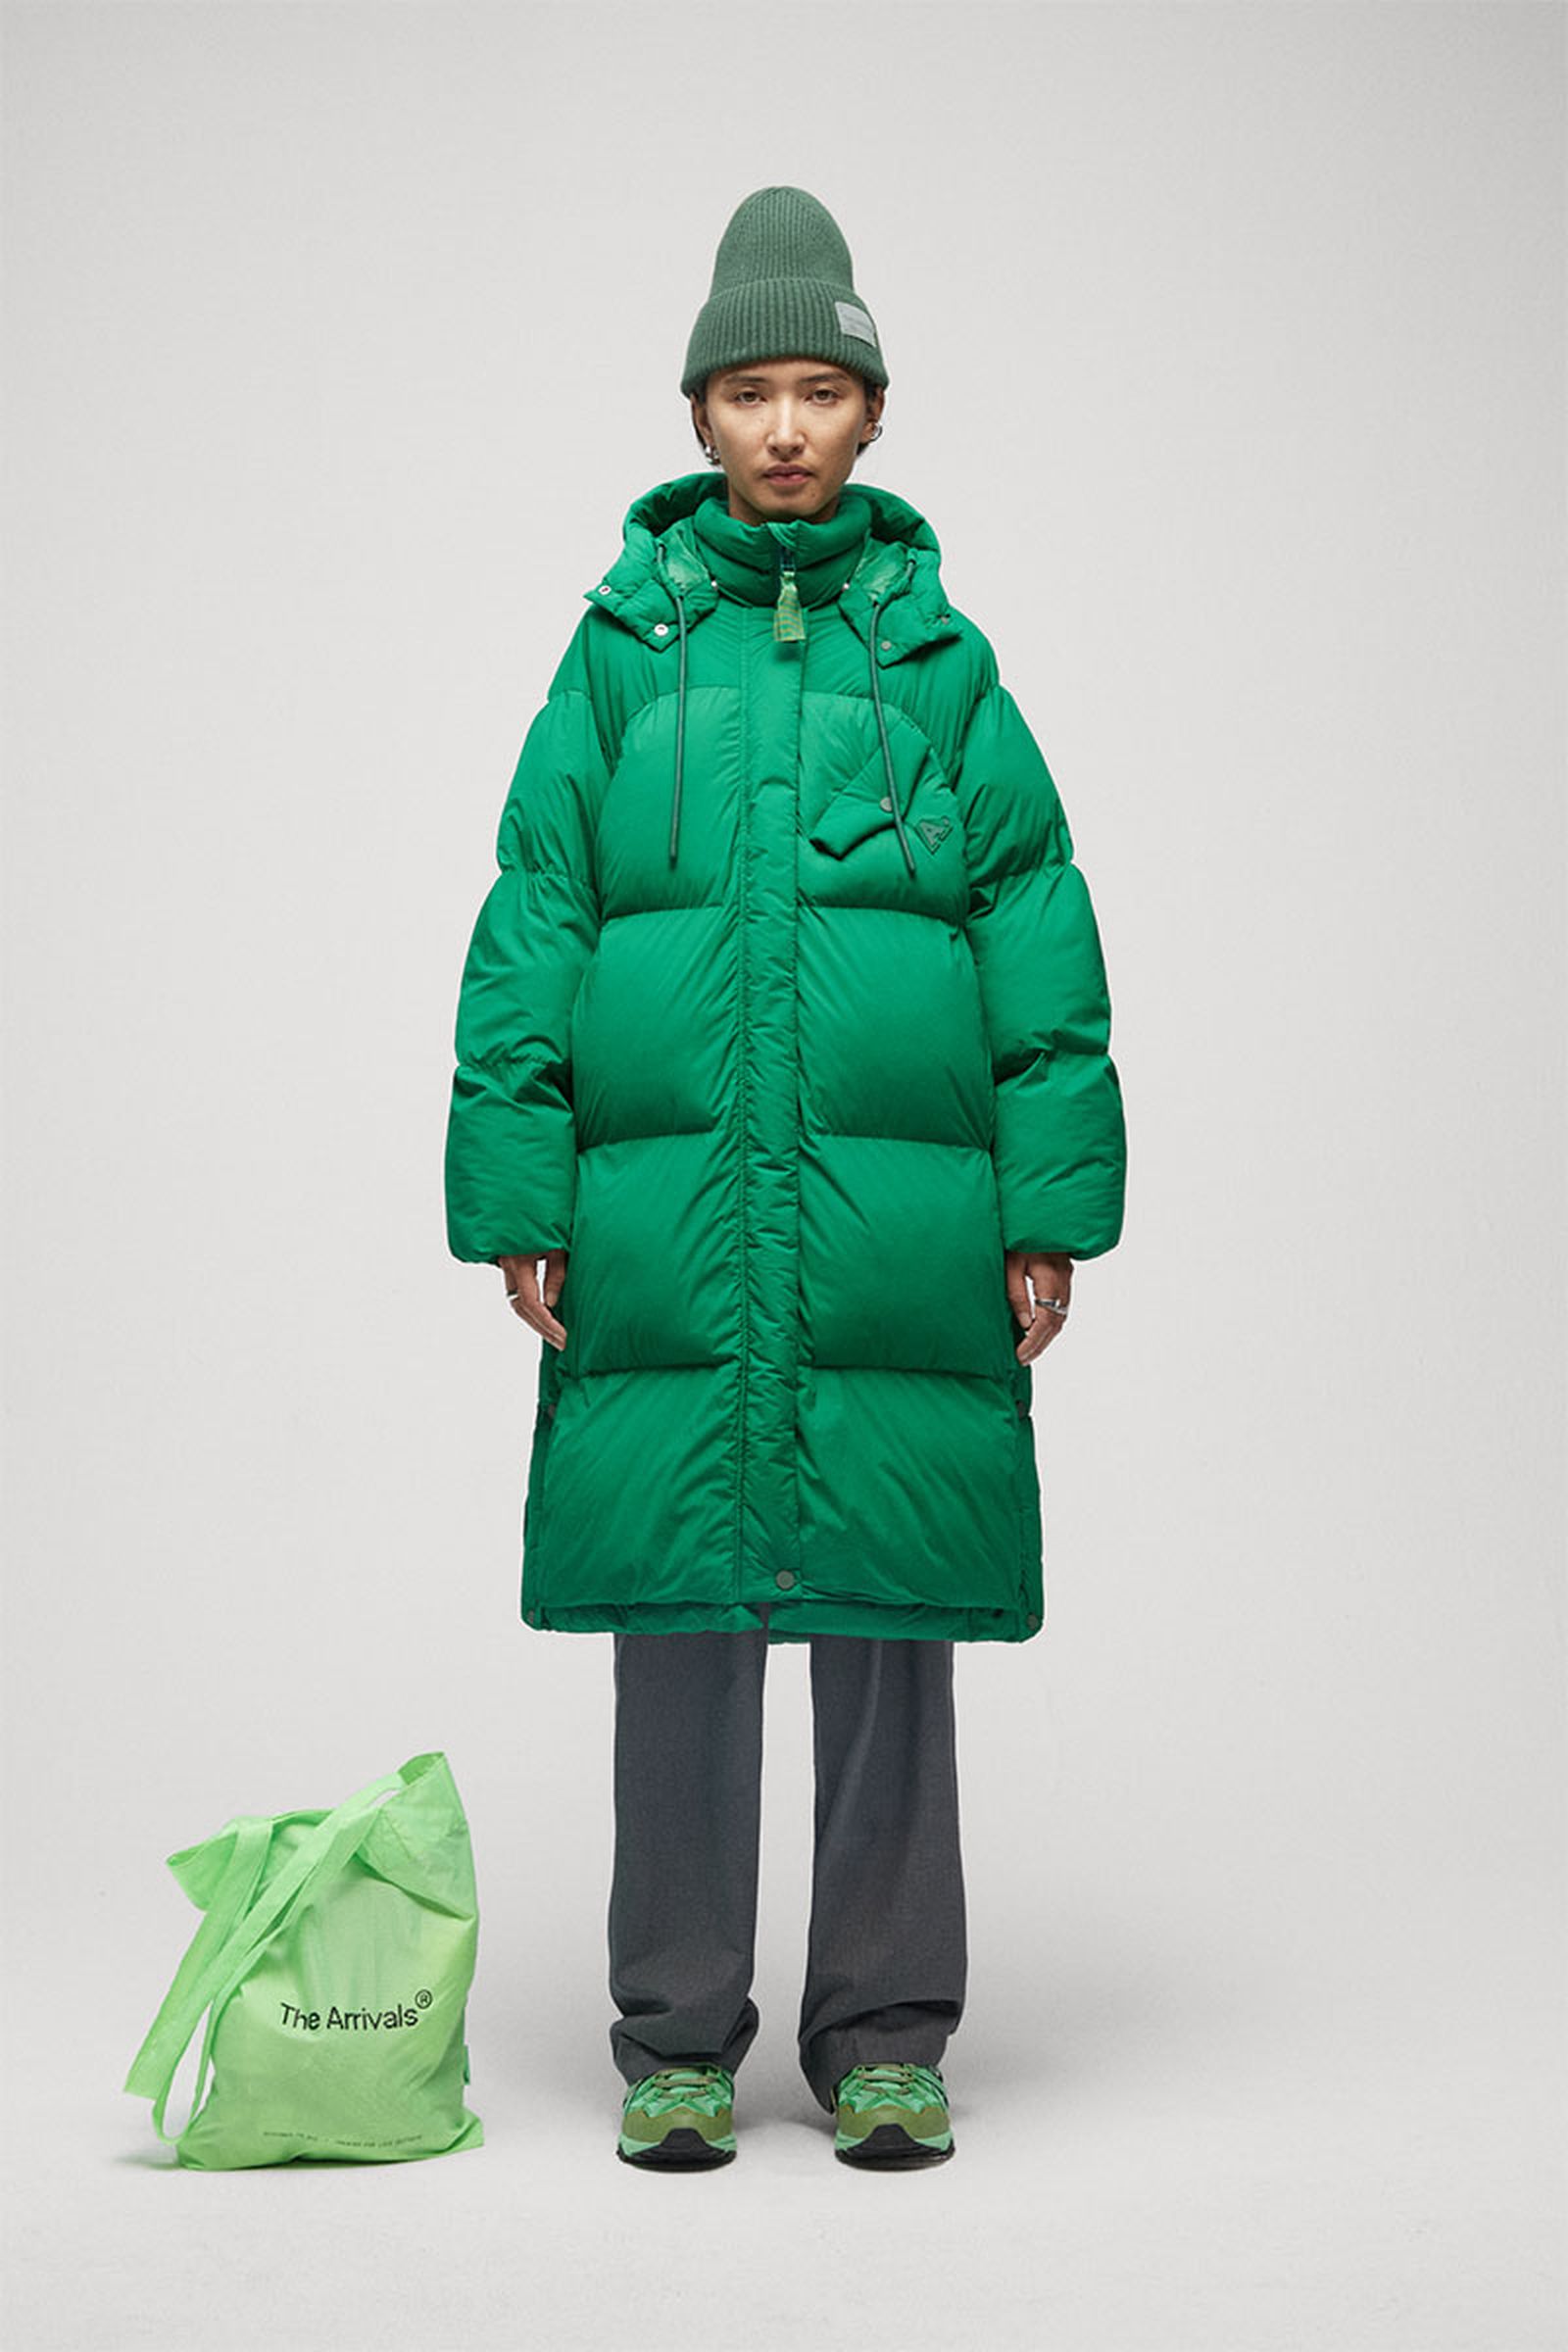 the-arrivals-aw22_0005_W-SLEEPER-TURF_COVER-1